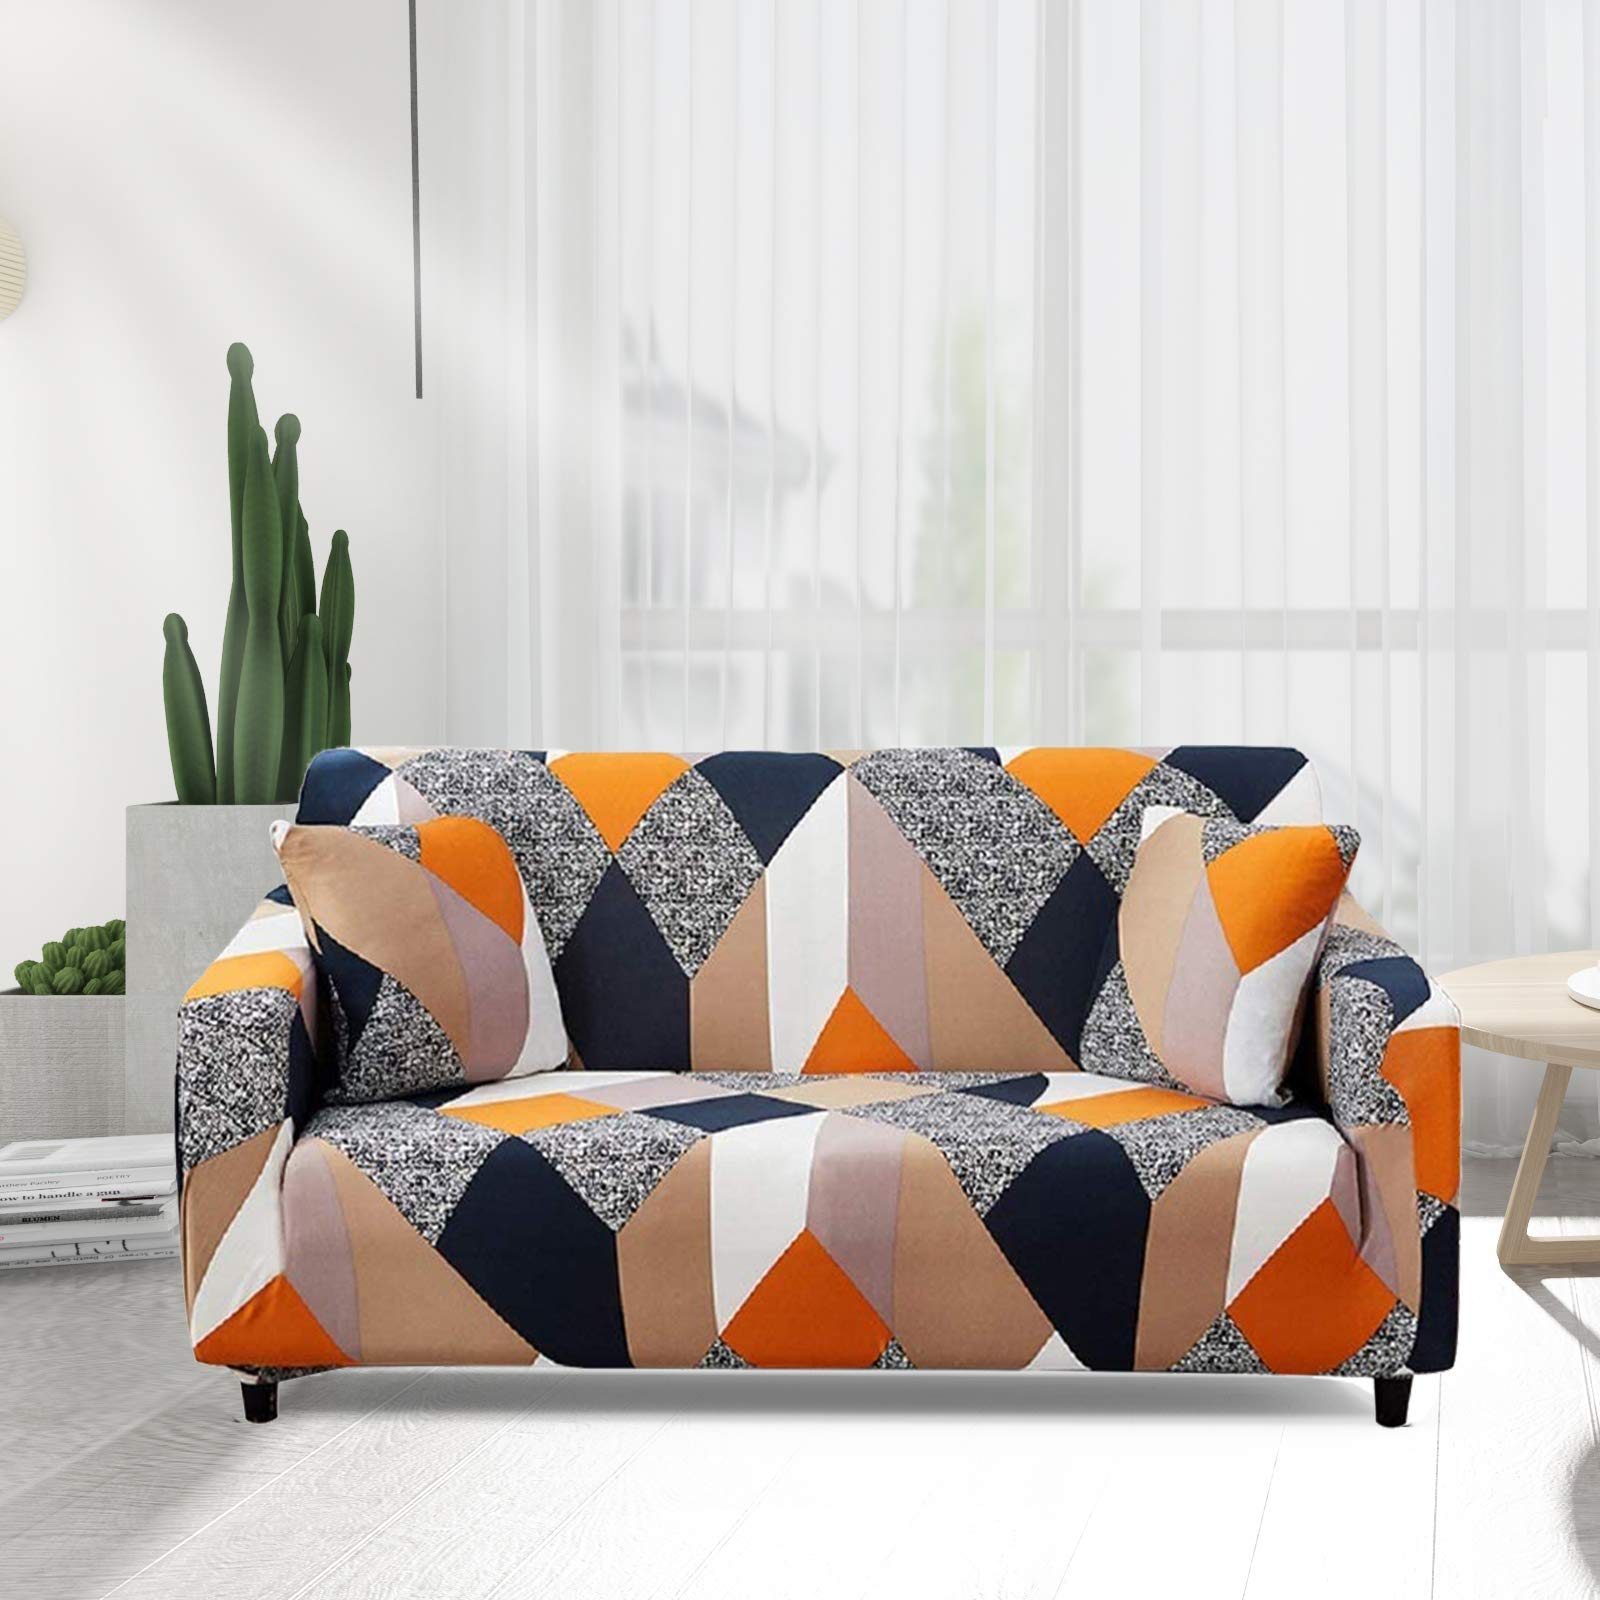 Stretch Sofa Covers Printed Couch Cover Sofa Slipcovers for 3 Cushion Couches Elastic Universal Furniture Protector